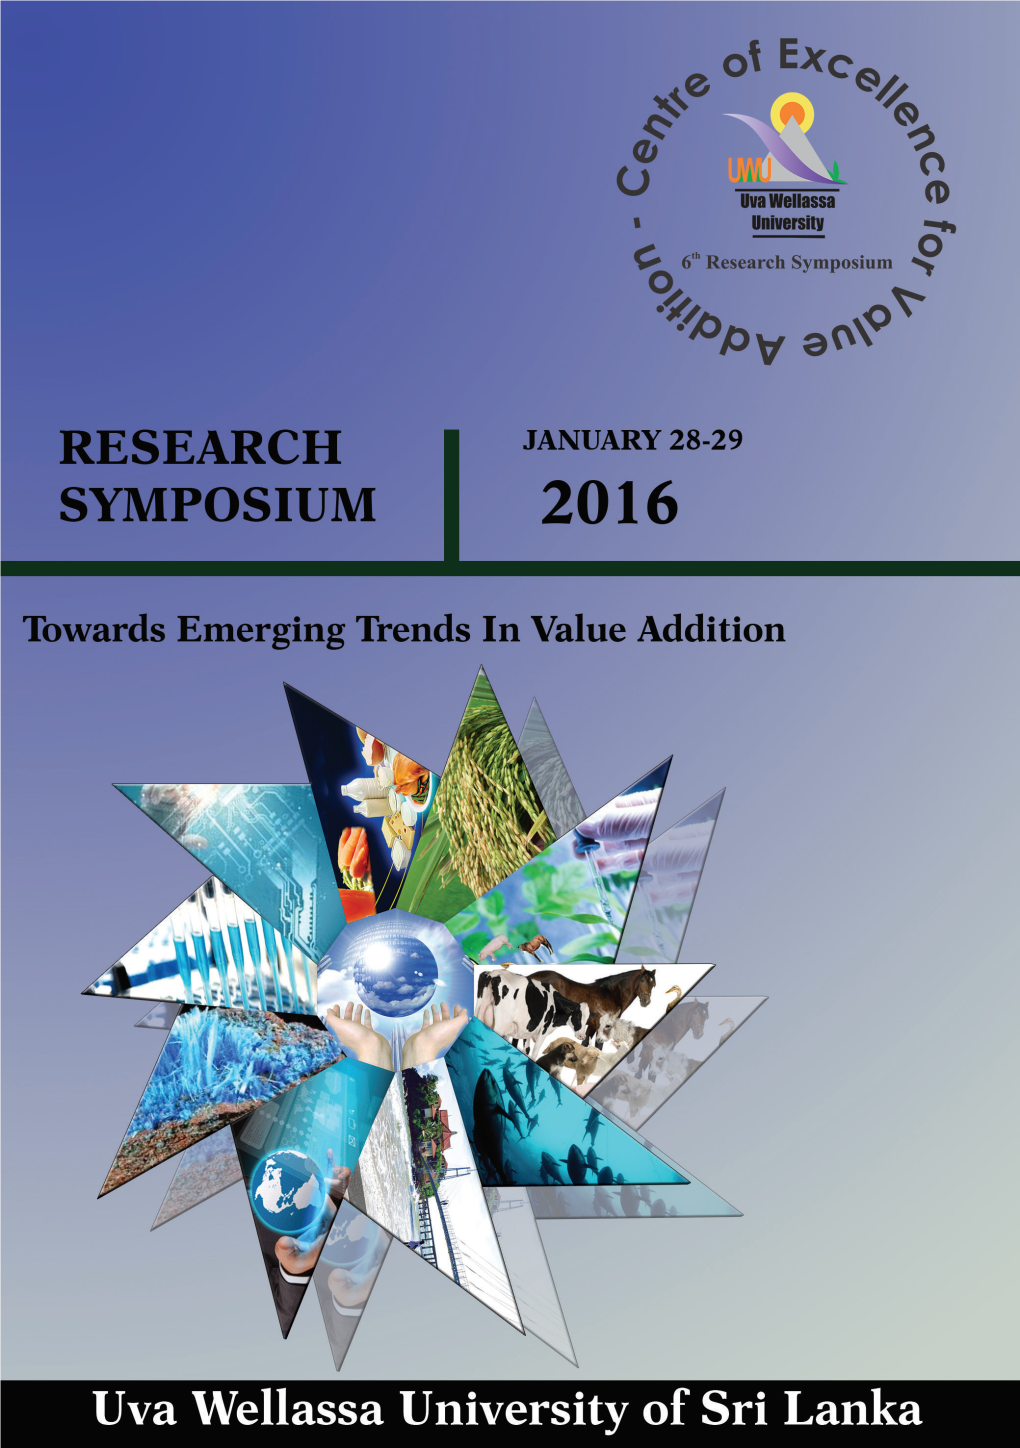 6 Research Symposium, Organized by Uva for the 6Th Research Symposium